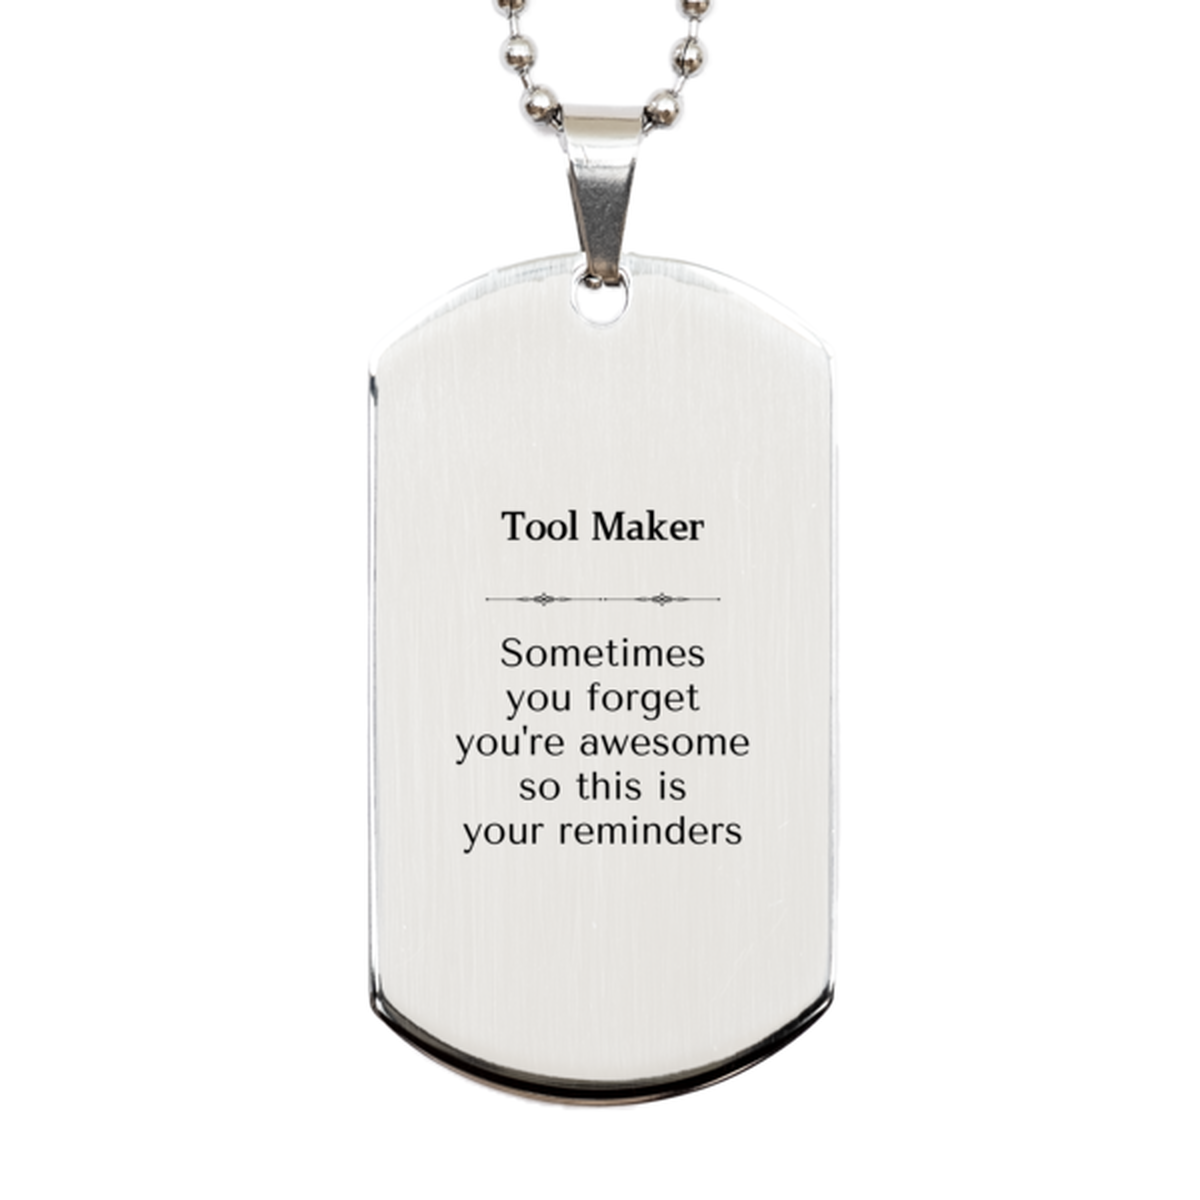 Sentimental Tool Maker Silver Dog Tag, Tool Maker Sometimes you forget you're awesome so this is your reminders, Graduation Christmas Birthday Gifts for Tool Maker, Men, Women, Coworkers